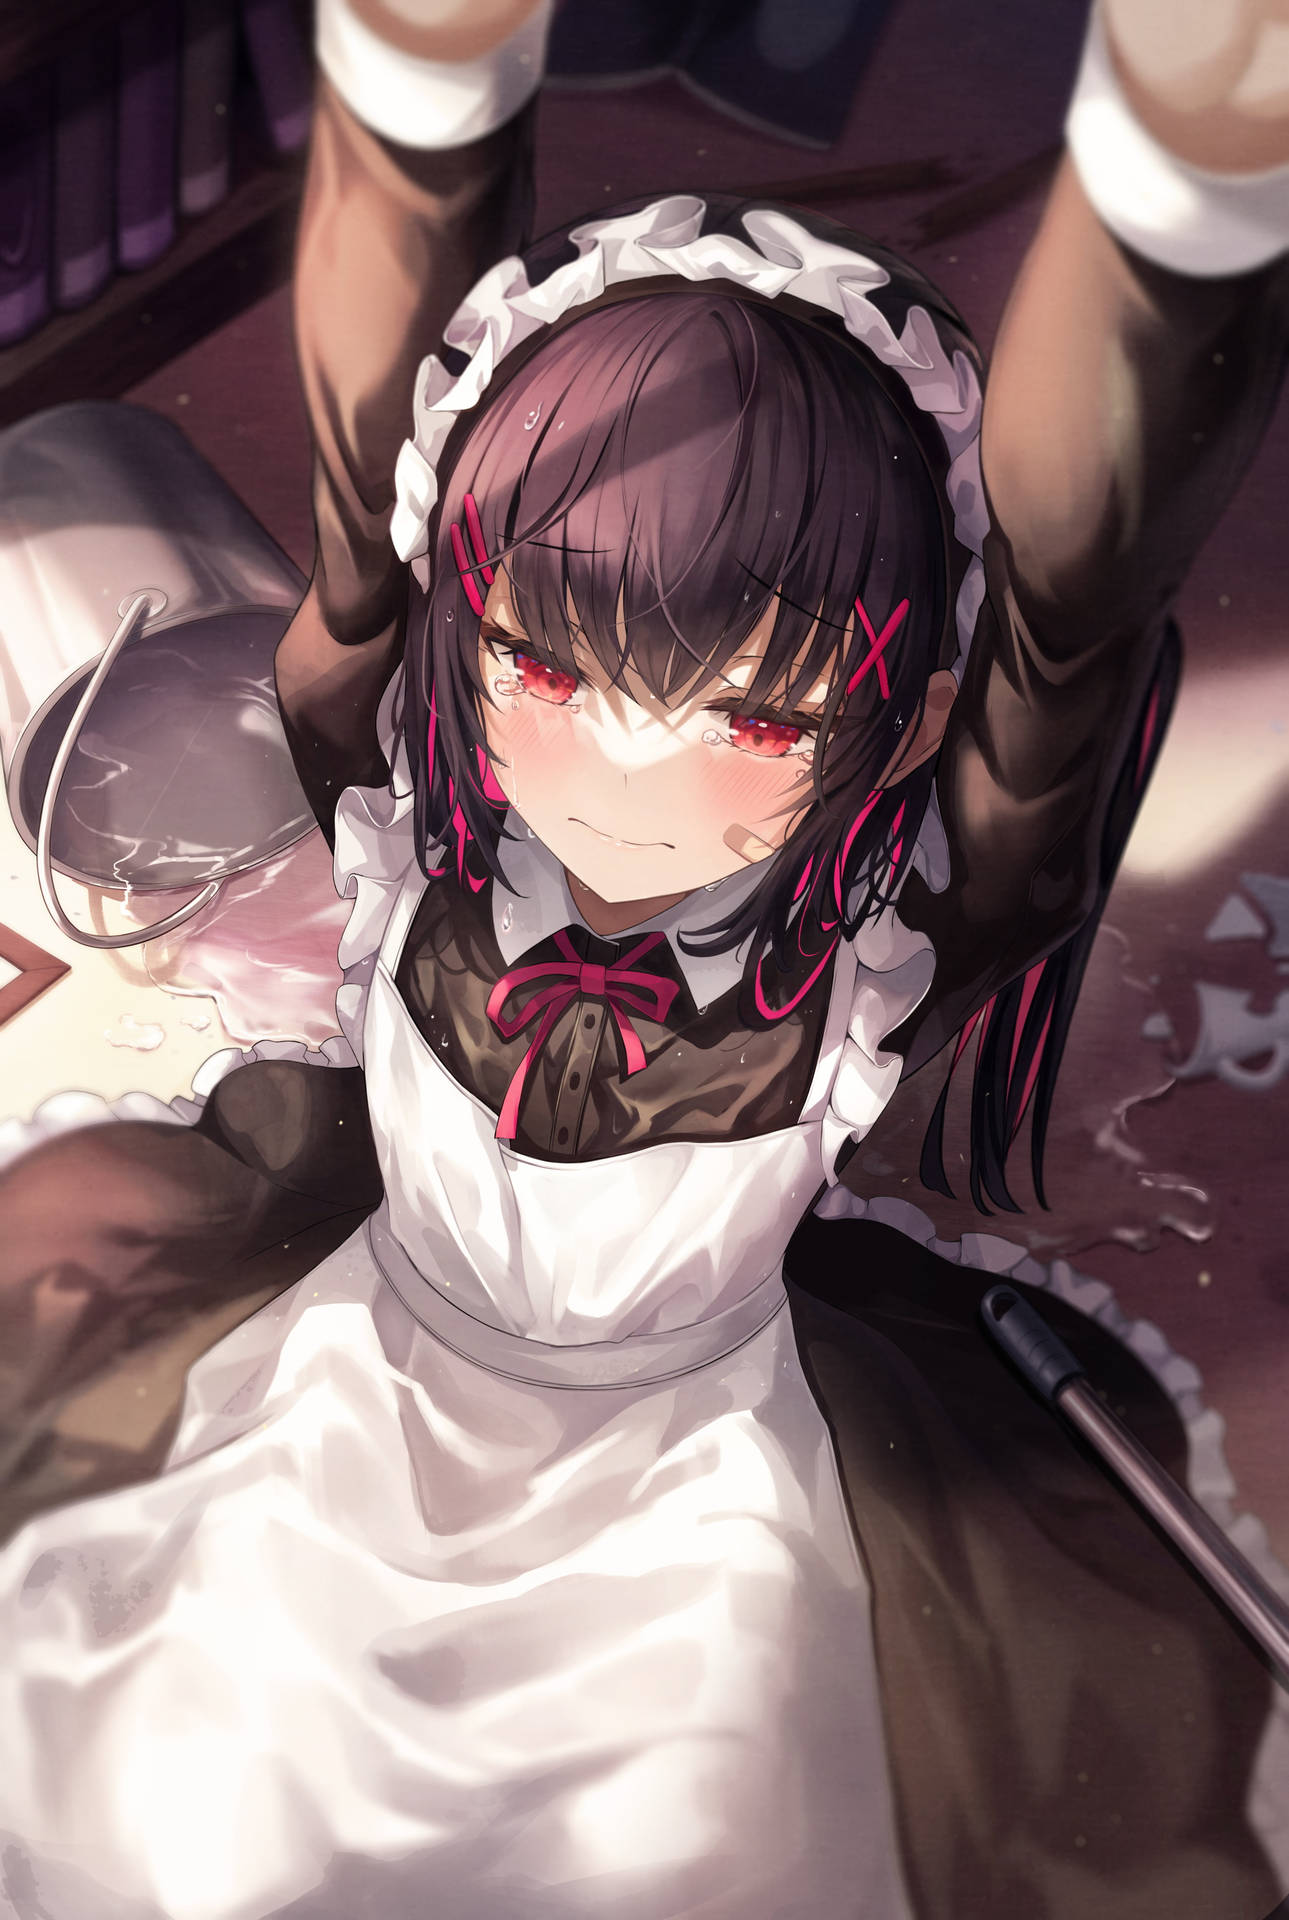 Heart-Touching Anime Waifu in Maid Outfit Expressing Emotion Wallpaper